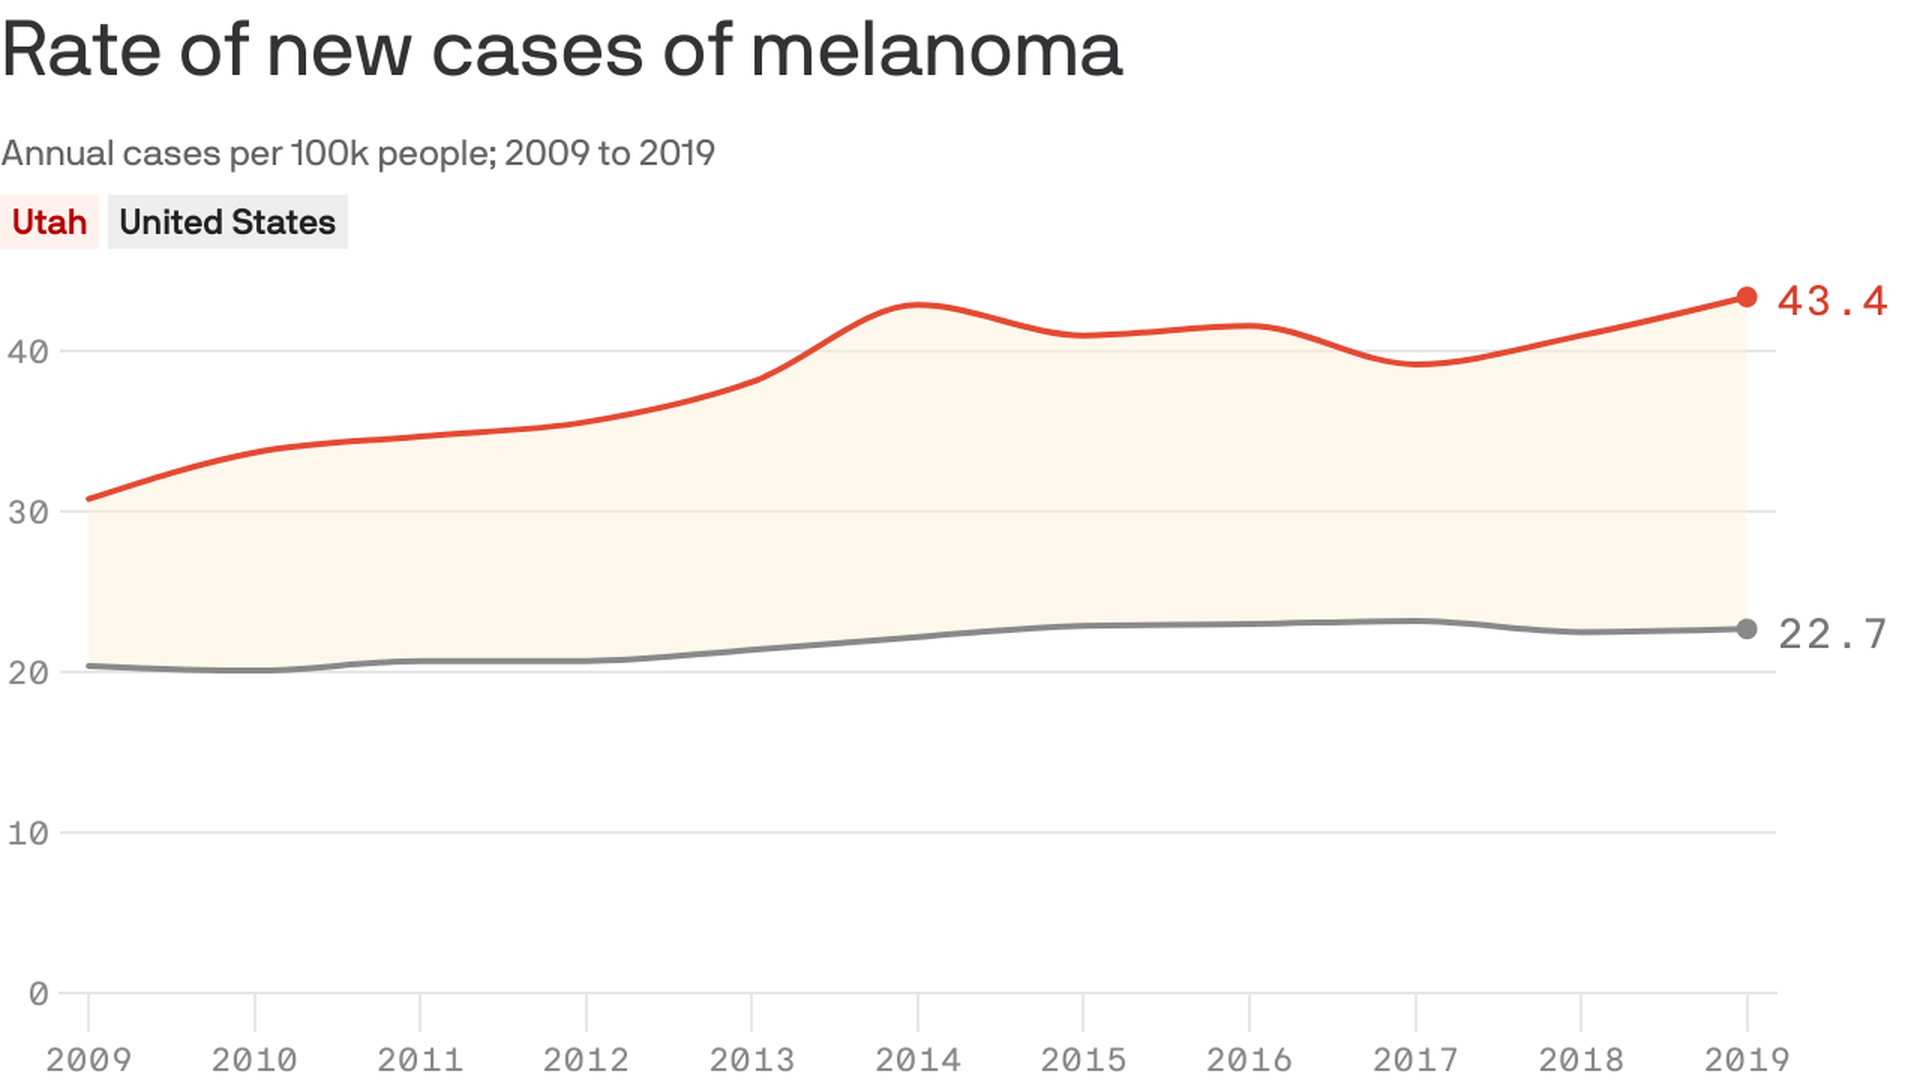 Chart shows Utah melanoma cases rising to 43.4 per 100K people by 2019, while the US average rate is 22.7.